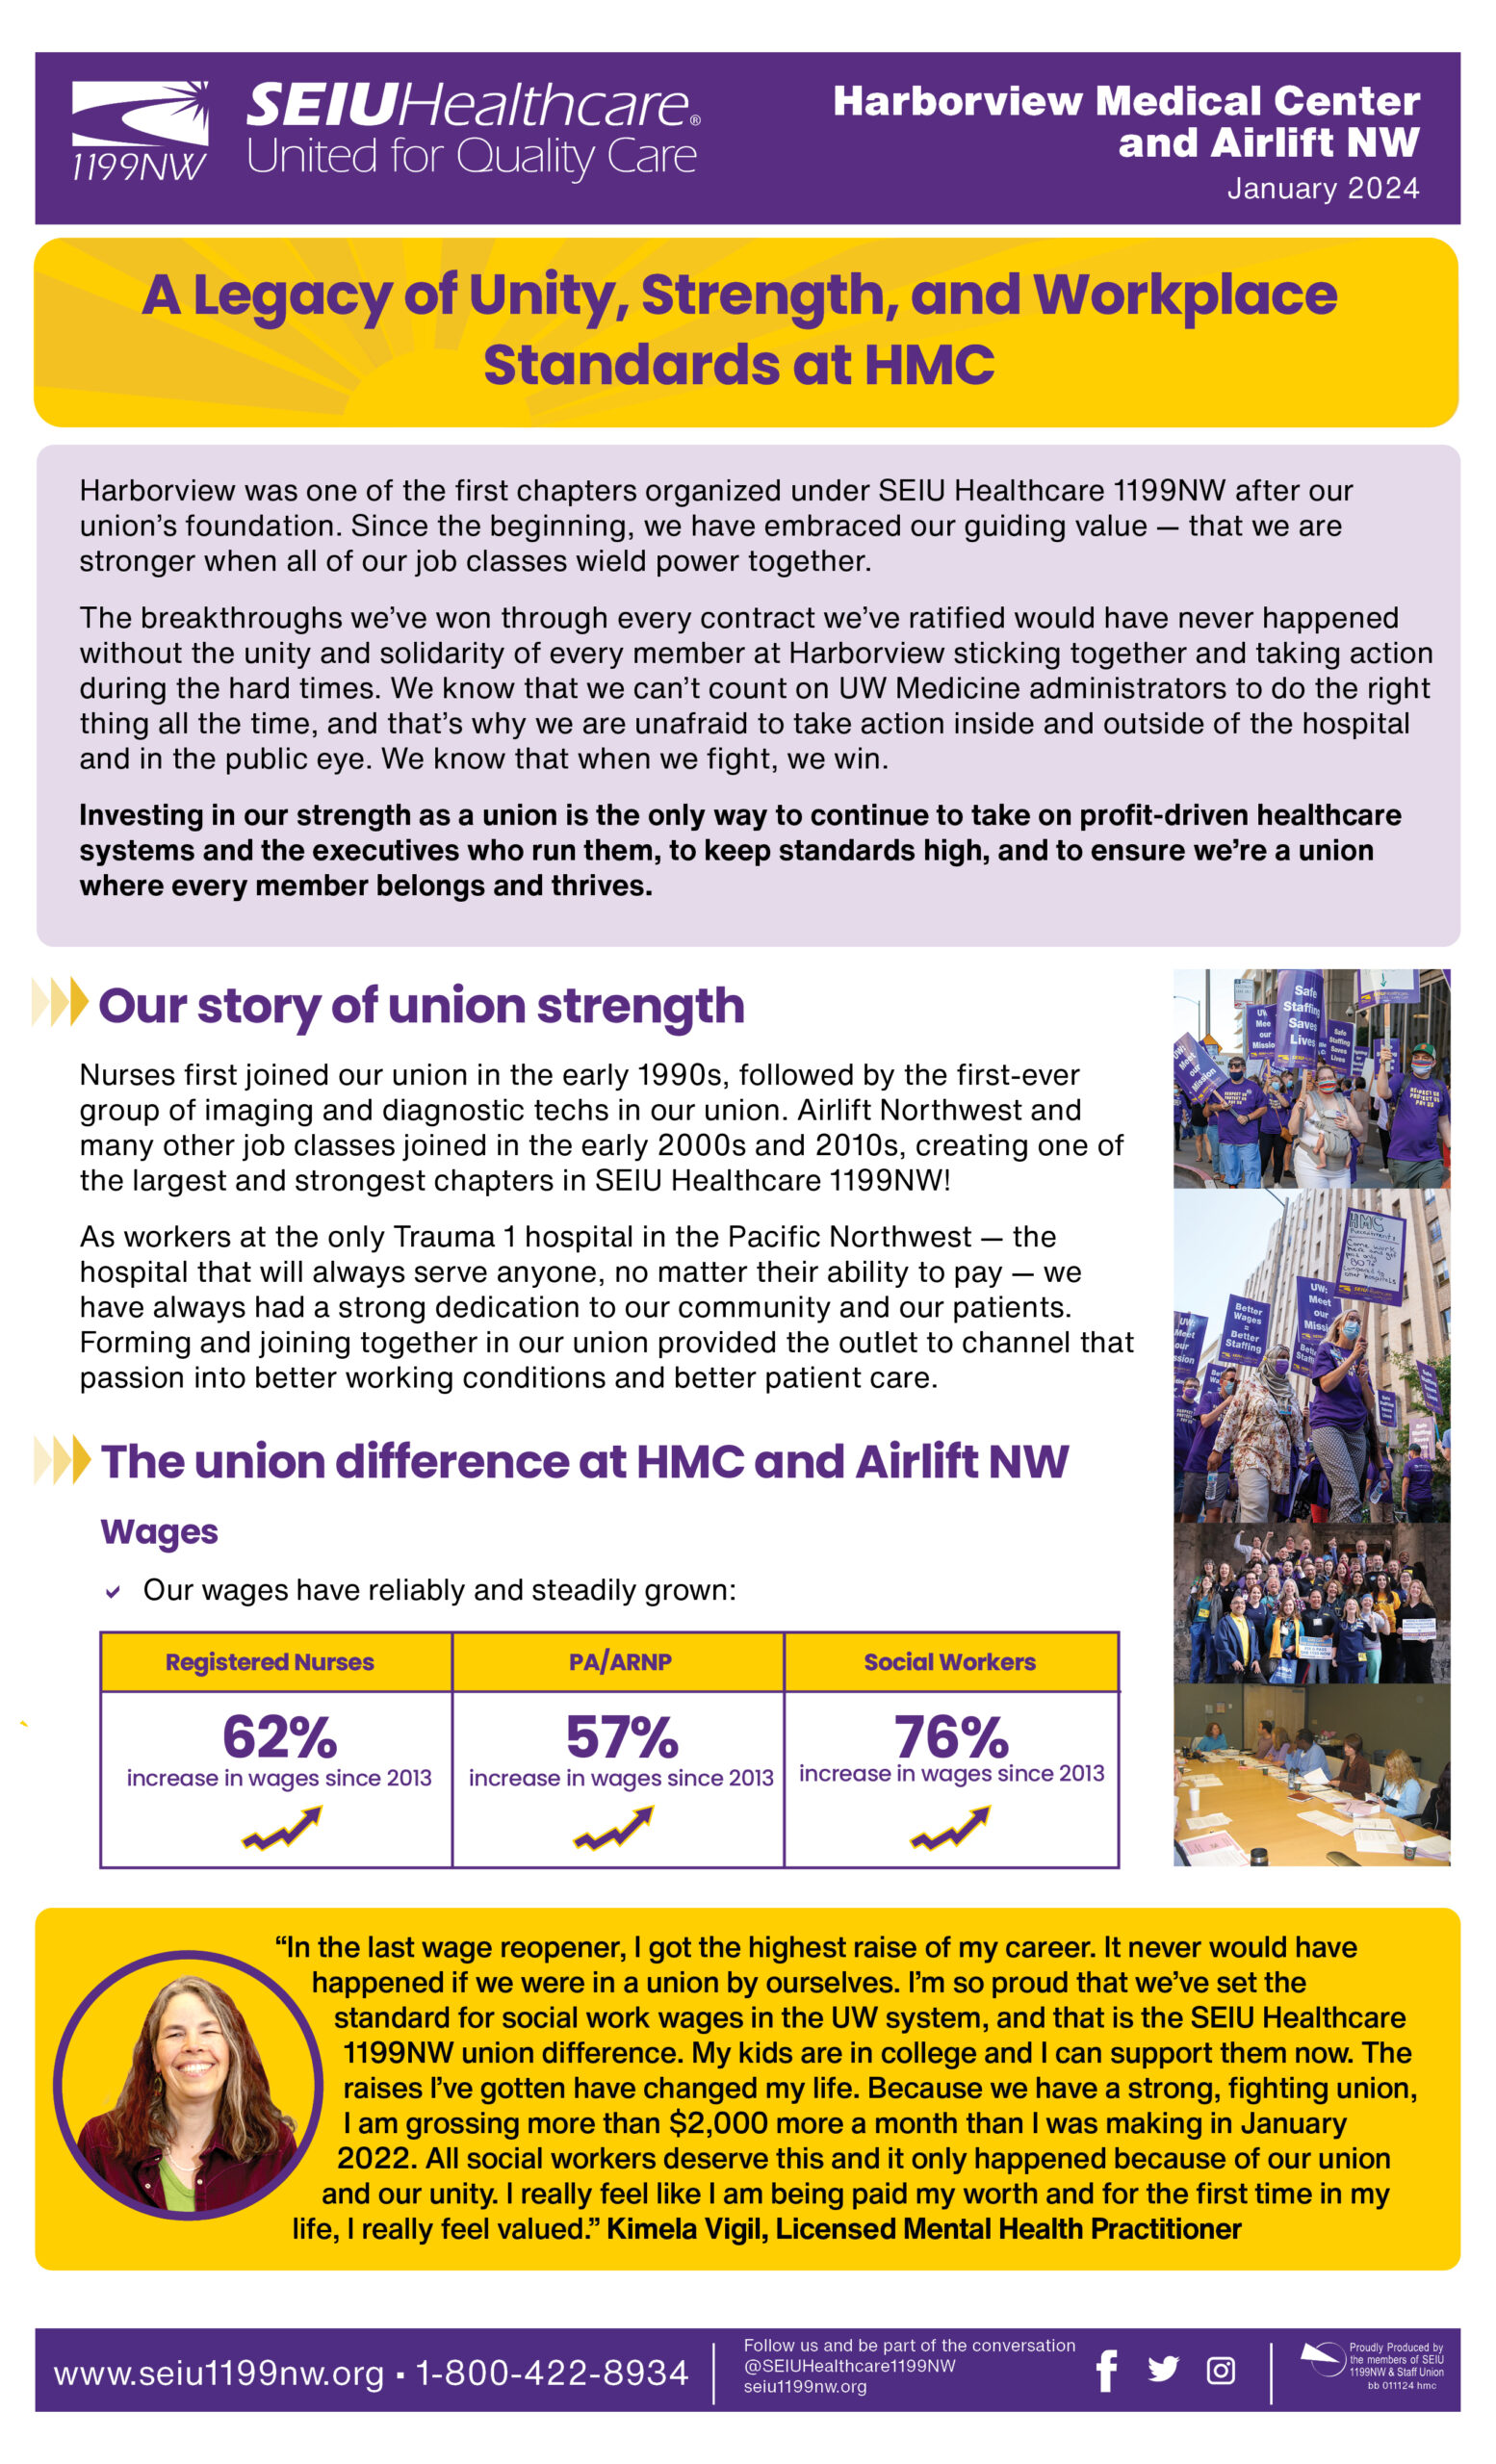 A Legacy of Unity, Strength, and Workplace Standards at HMC